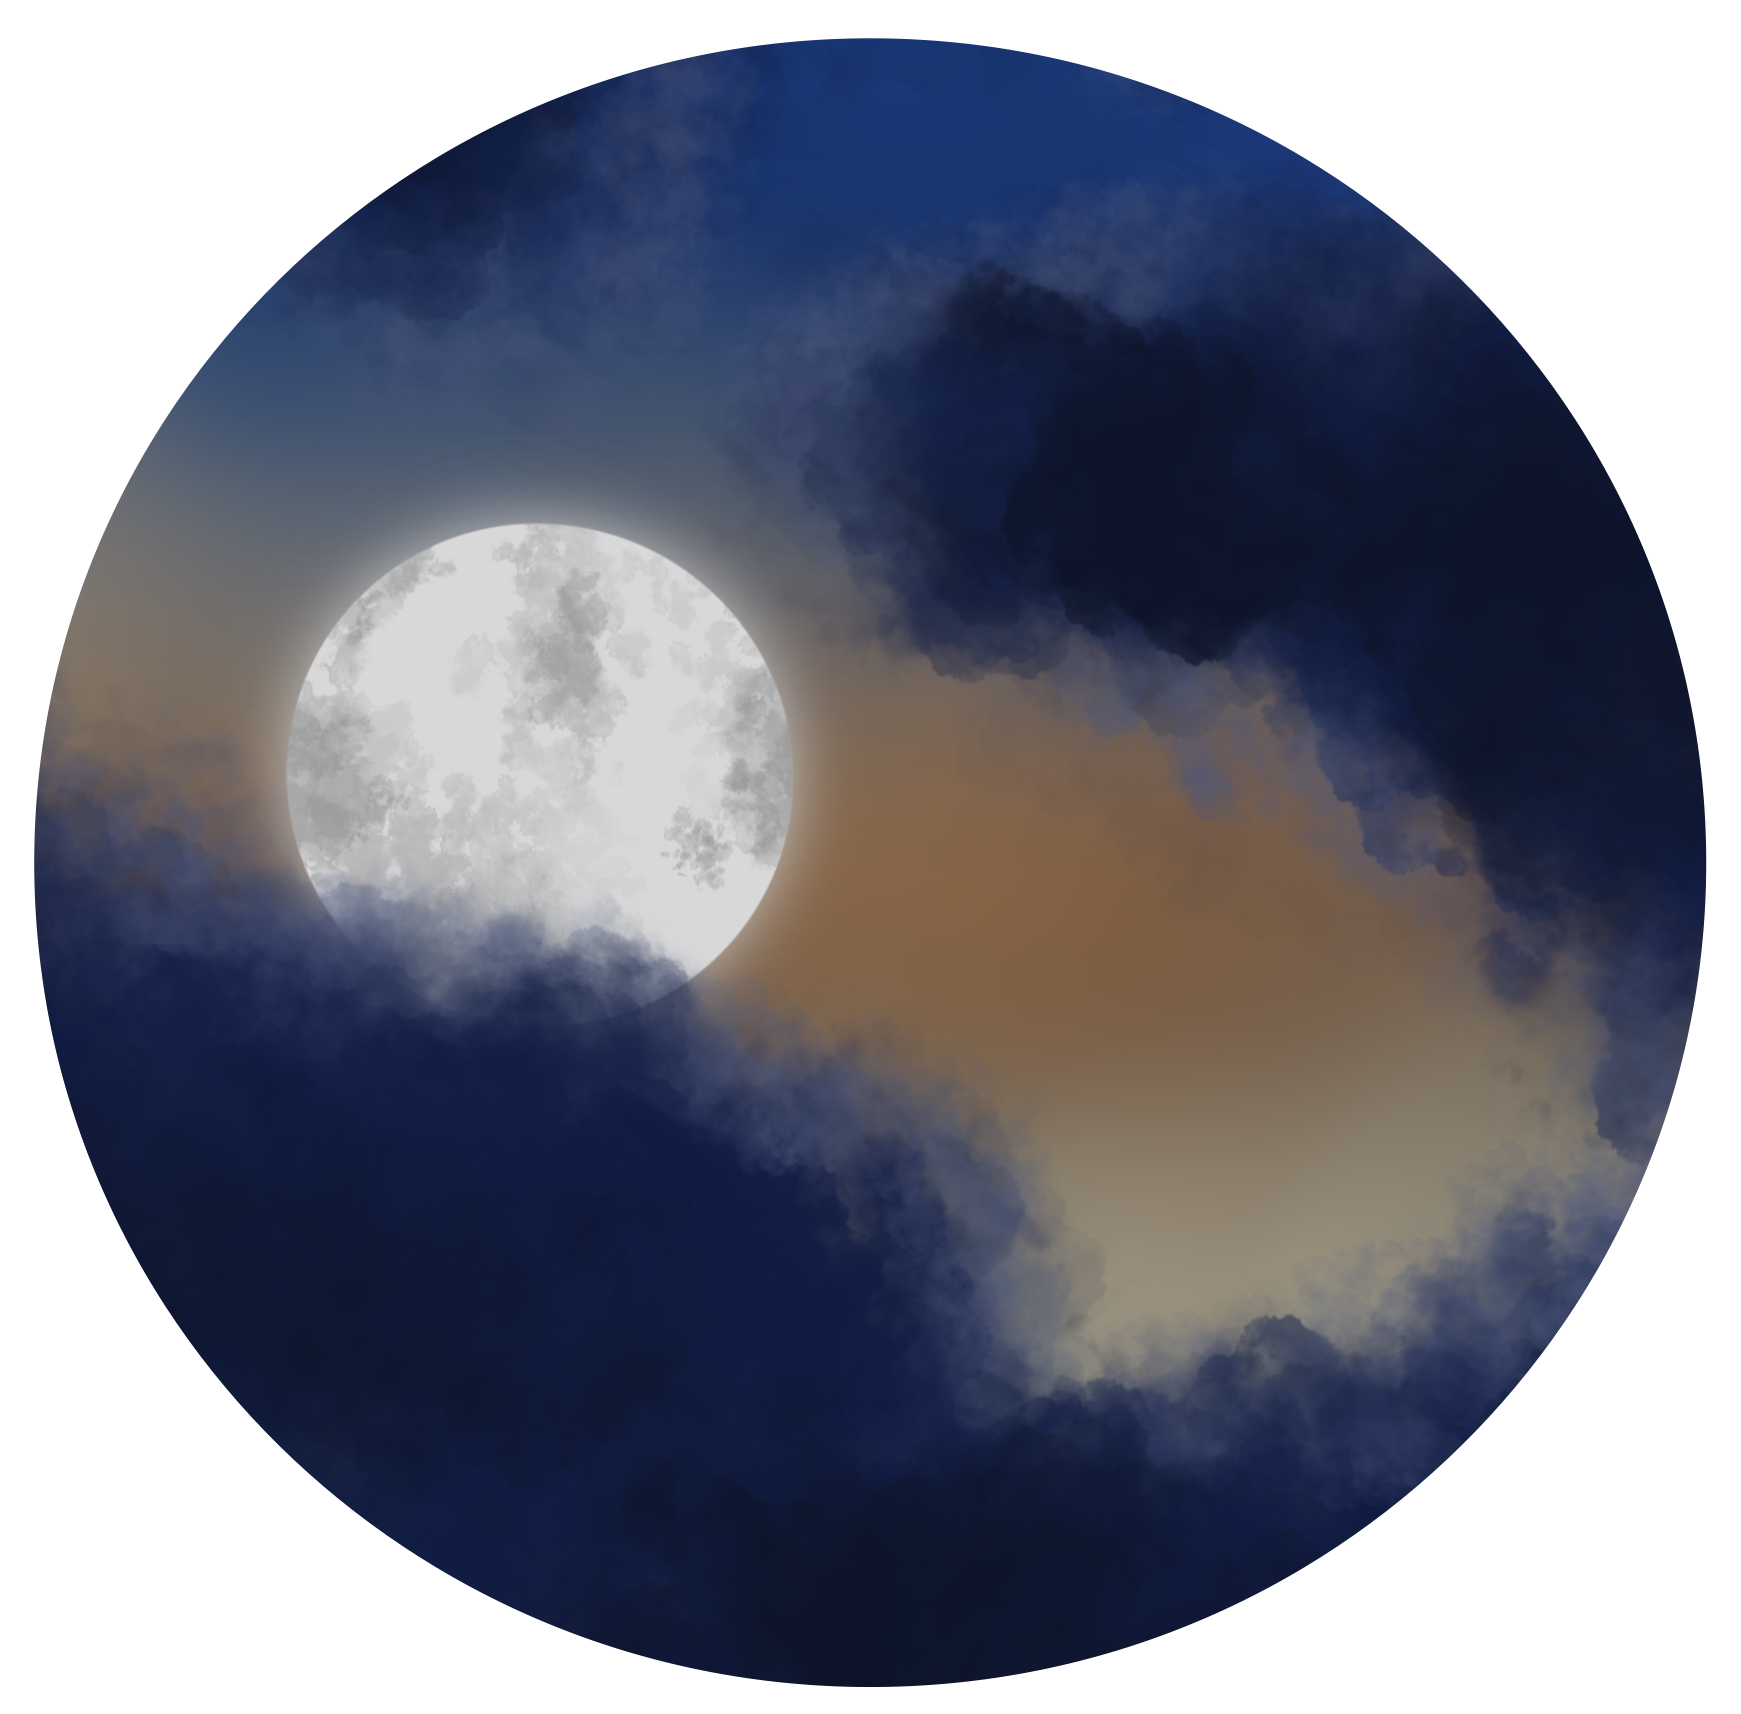 A round white moon set amongst dark clouds on a sunset background.